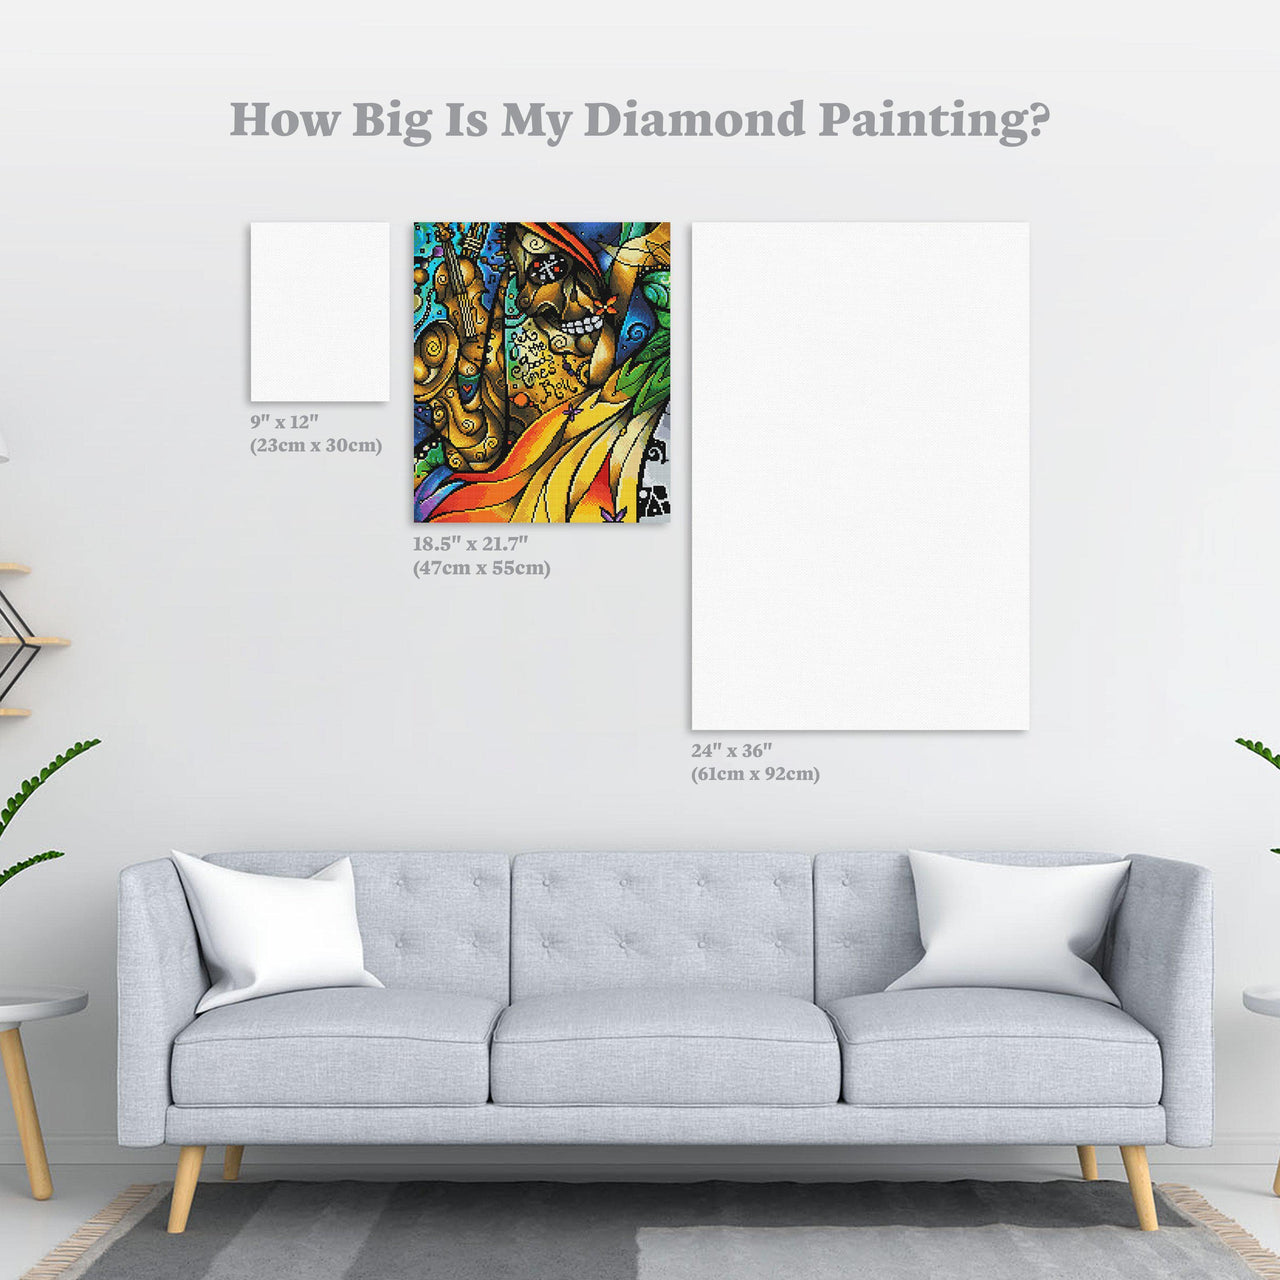 Diamond Painting Let the Good Times Roll 18.5" x 21.7" (47cm x 55cm) / Round With 42 Colors including 2 ABs